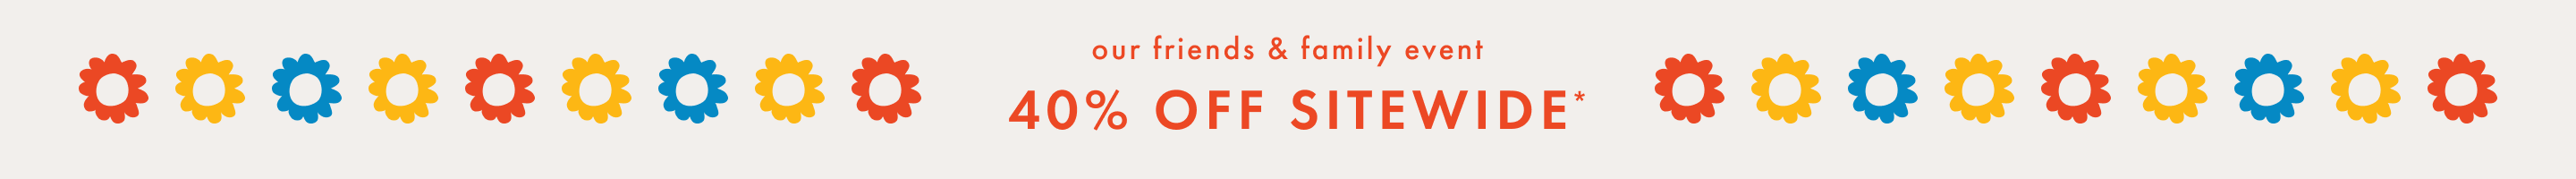 Friends & Family Sale graphic